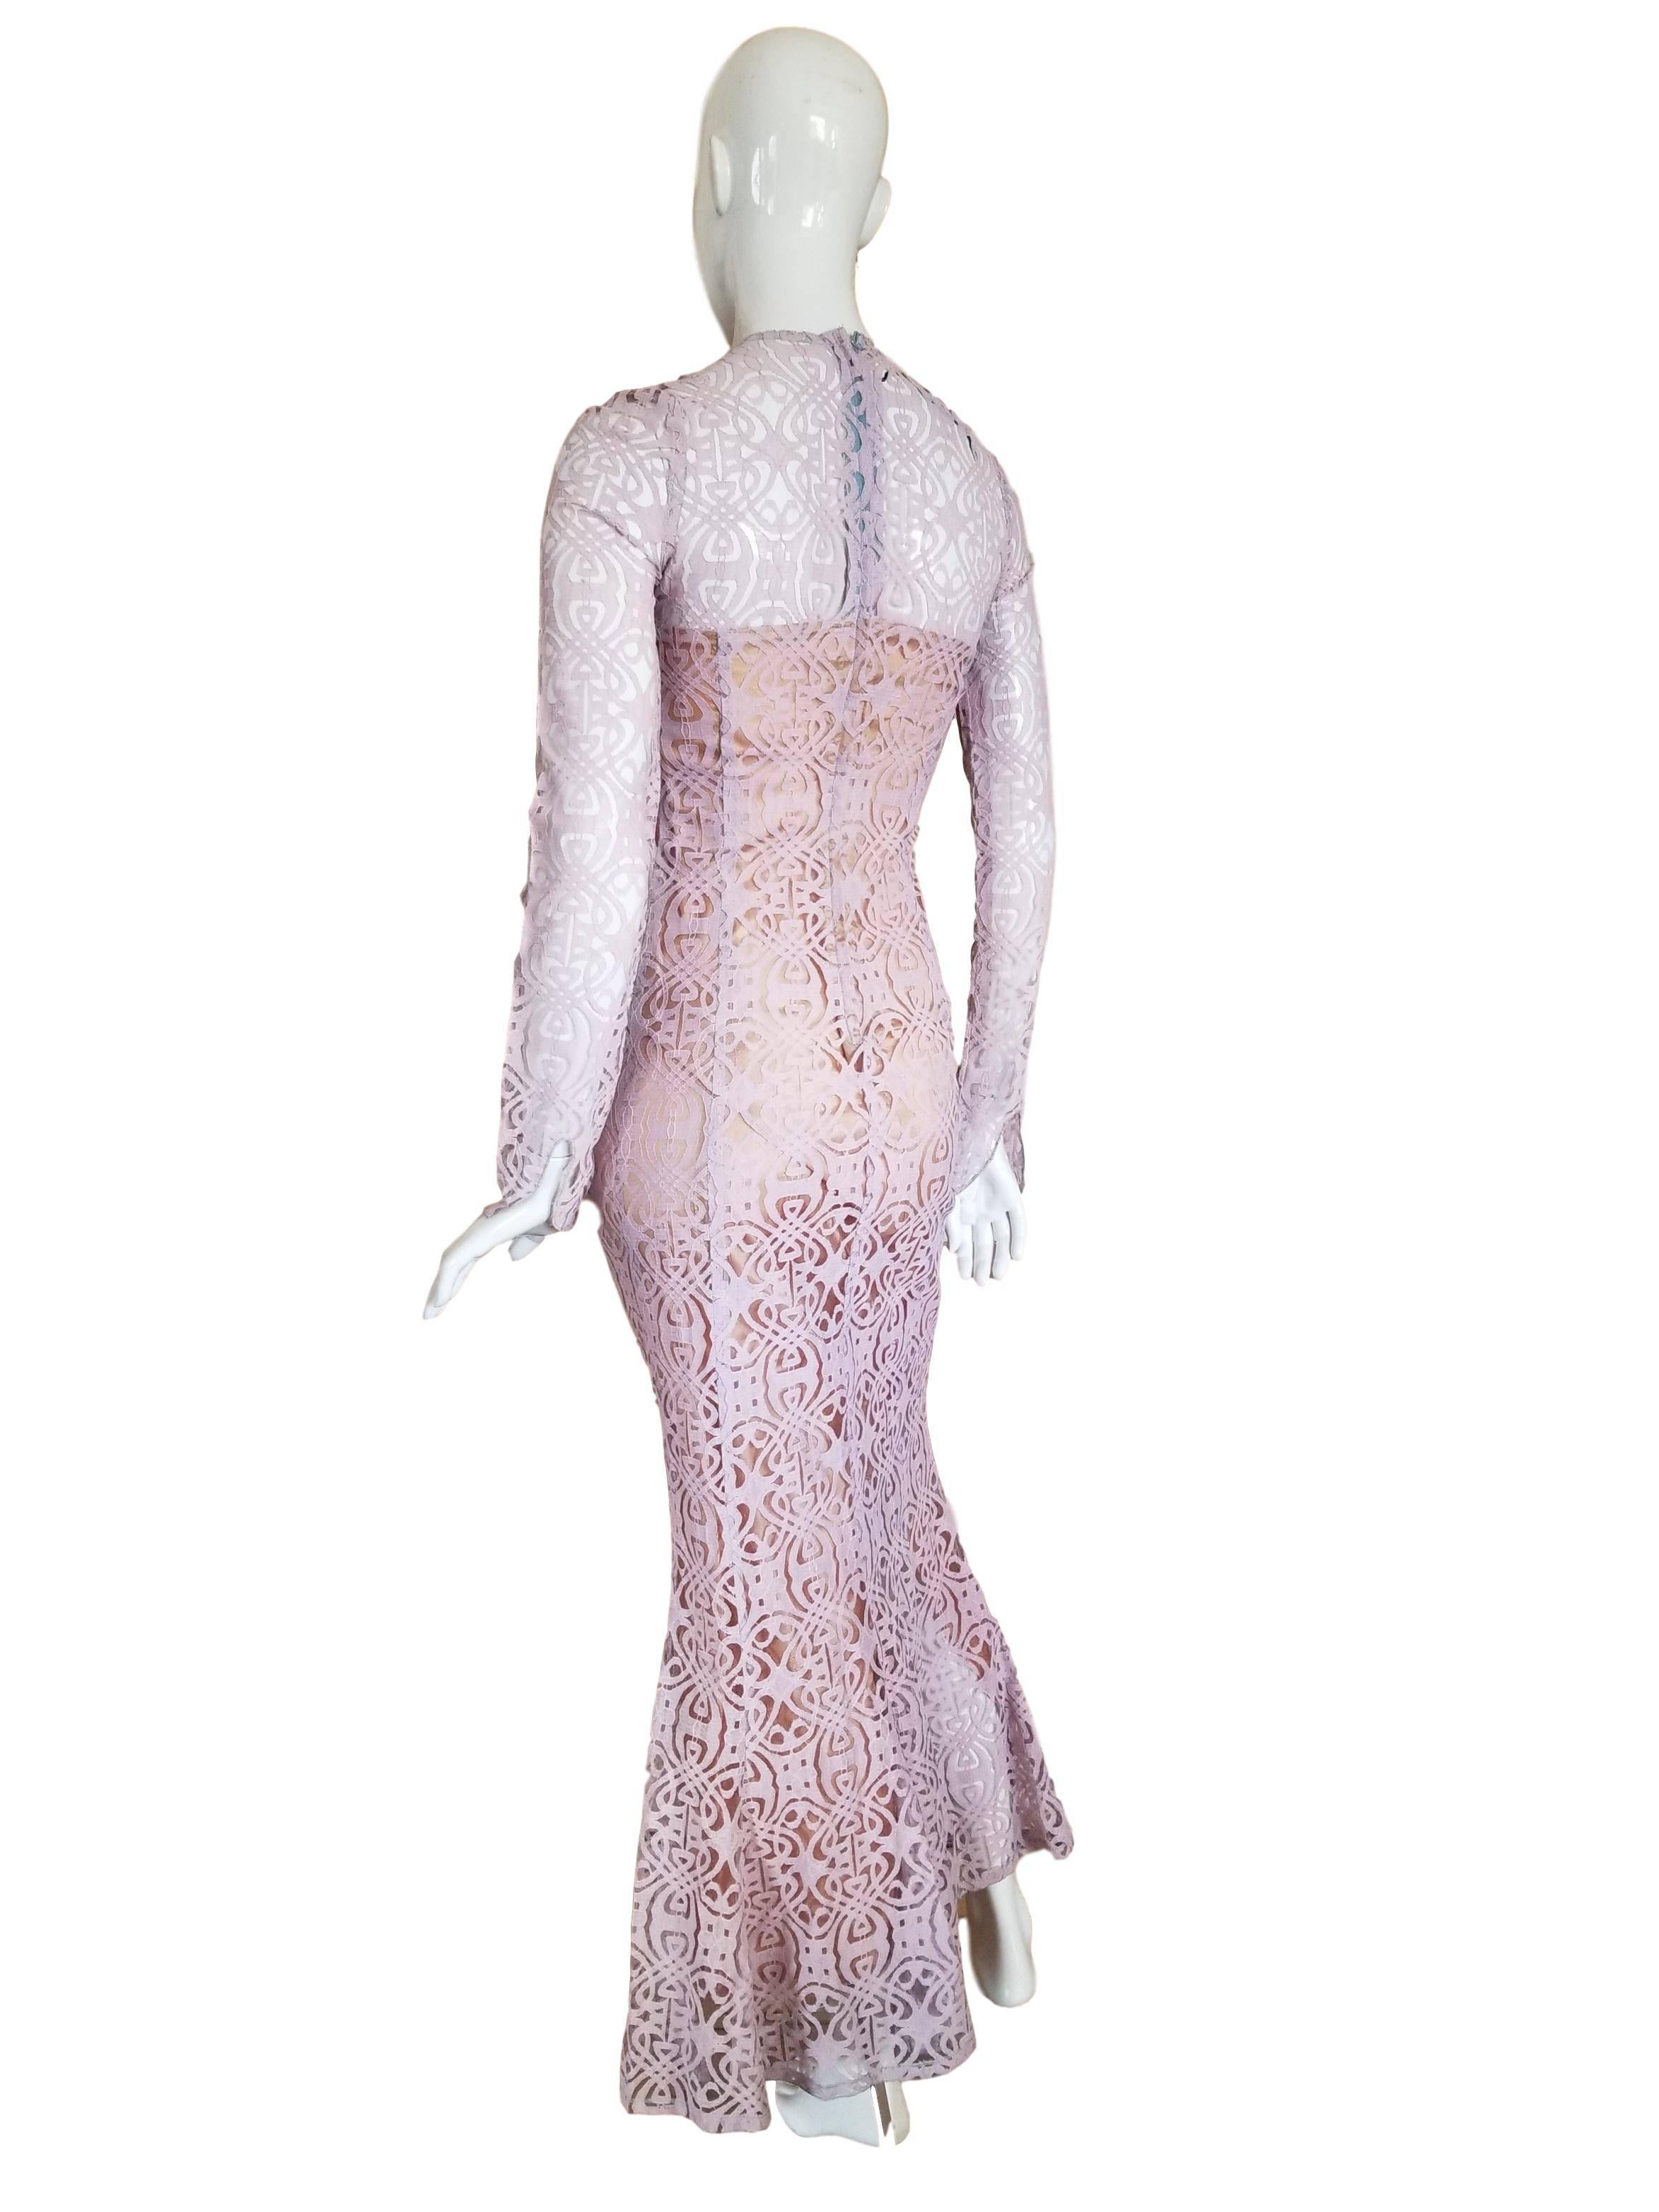 Original vintage Biba wedding dress 
Bought and worn once in 1969 by the bride. 
Gold lining with lavender lace in Biba Nouveau design. Metal back zip. 
Excellent condition 
Measures just over 16 inches across chest and 58 inches length